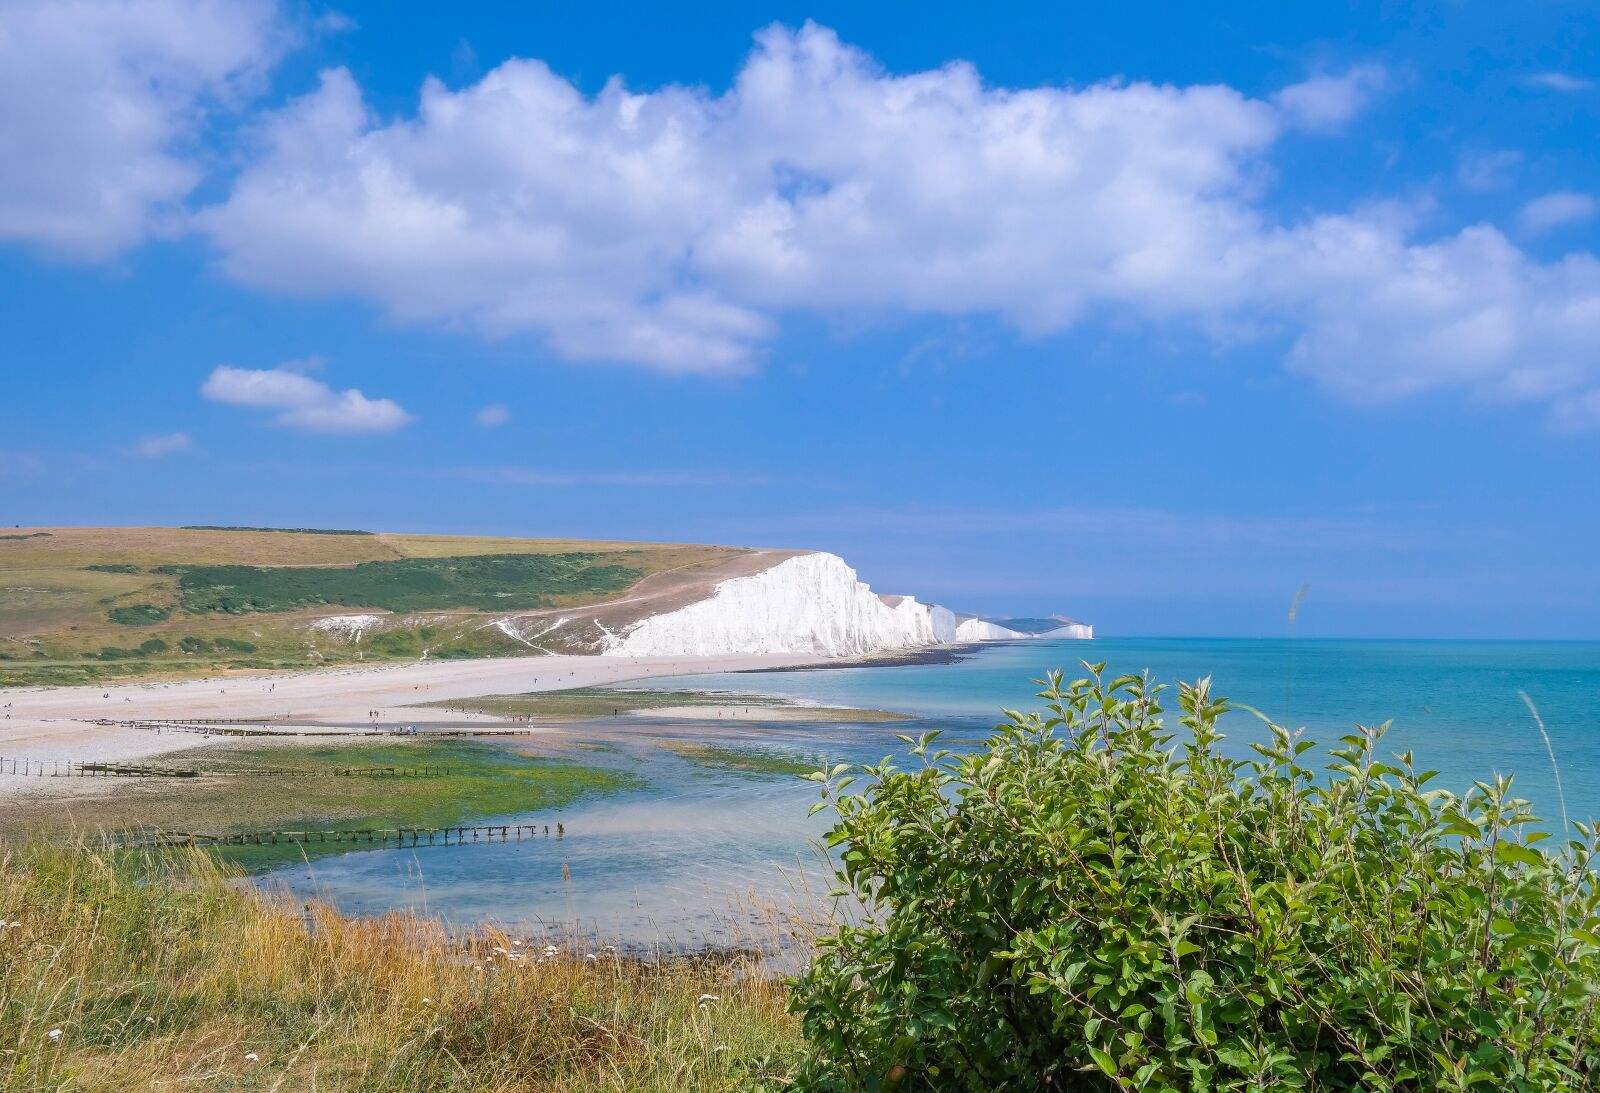 Samsung NX300 sample photo. Seven sisters, sussex, england photography